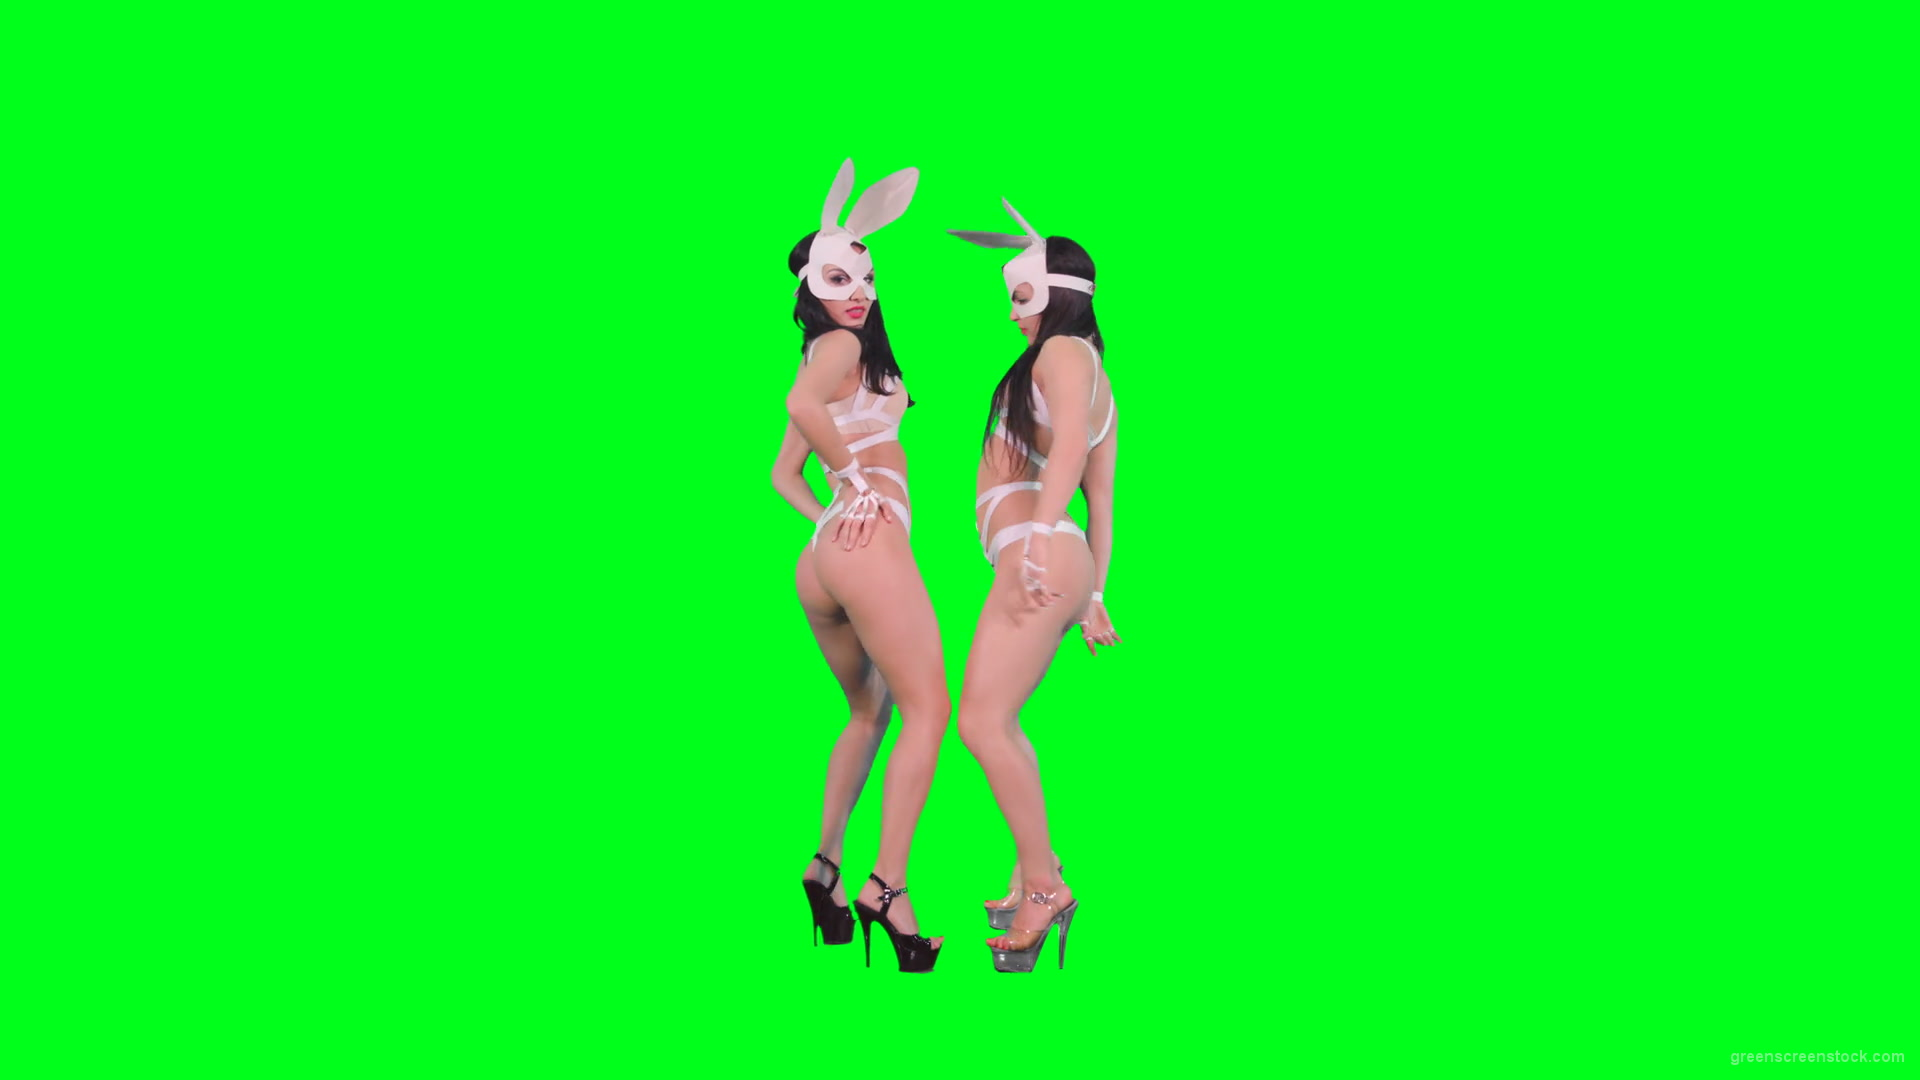 Light-erotic-girls-in-rabbit-playboy-costumes-on-green-screen-moving-sexy-4K-Video-Footage-1920_002 Green Screen Stock